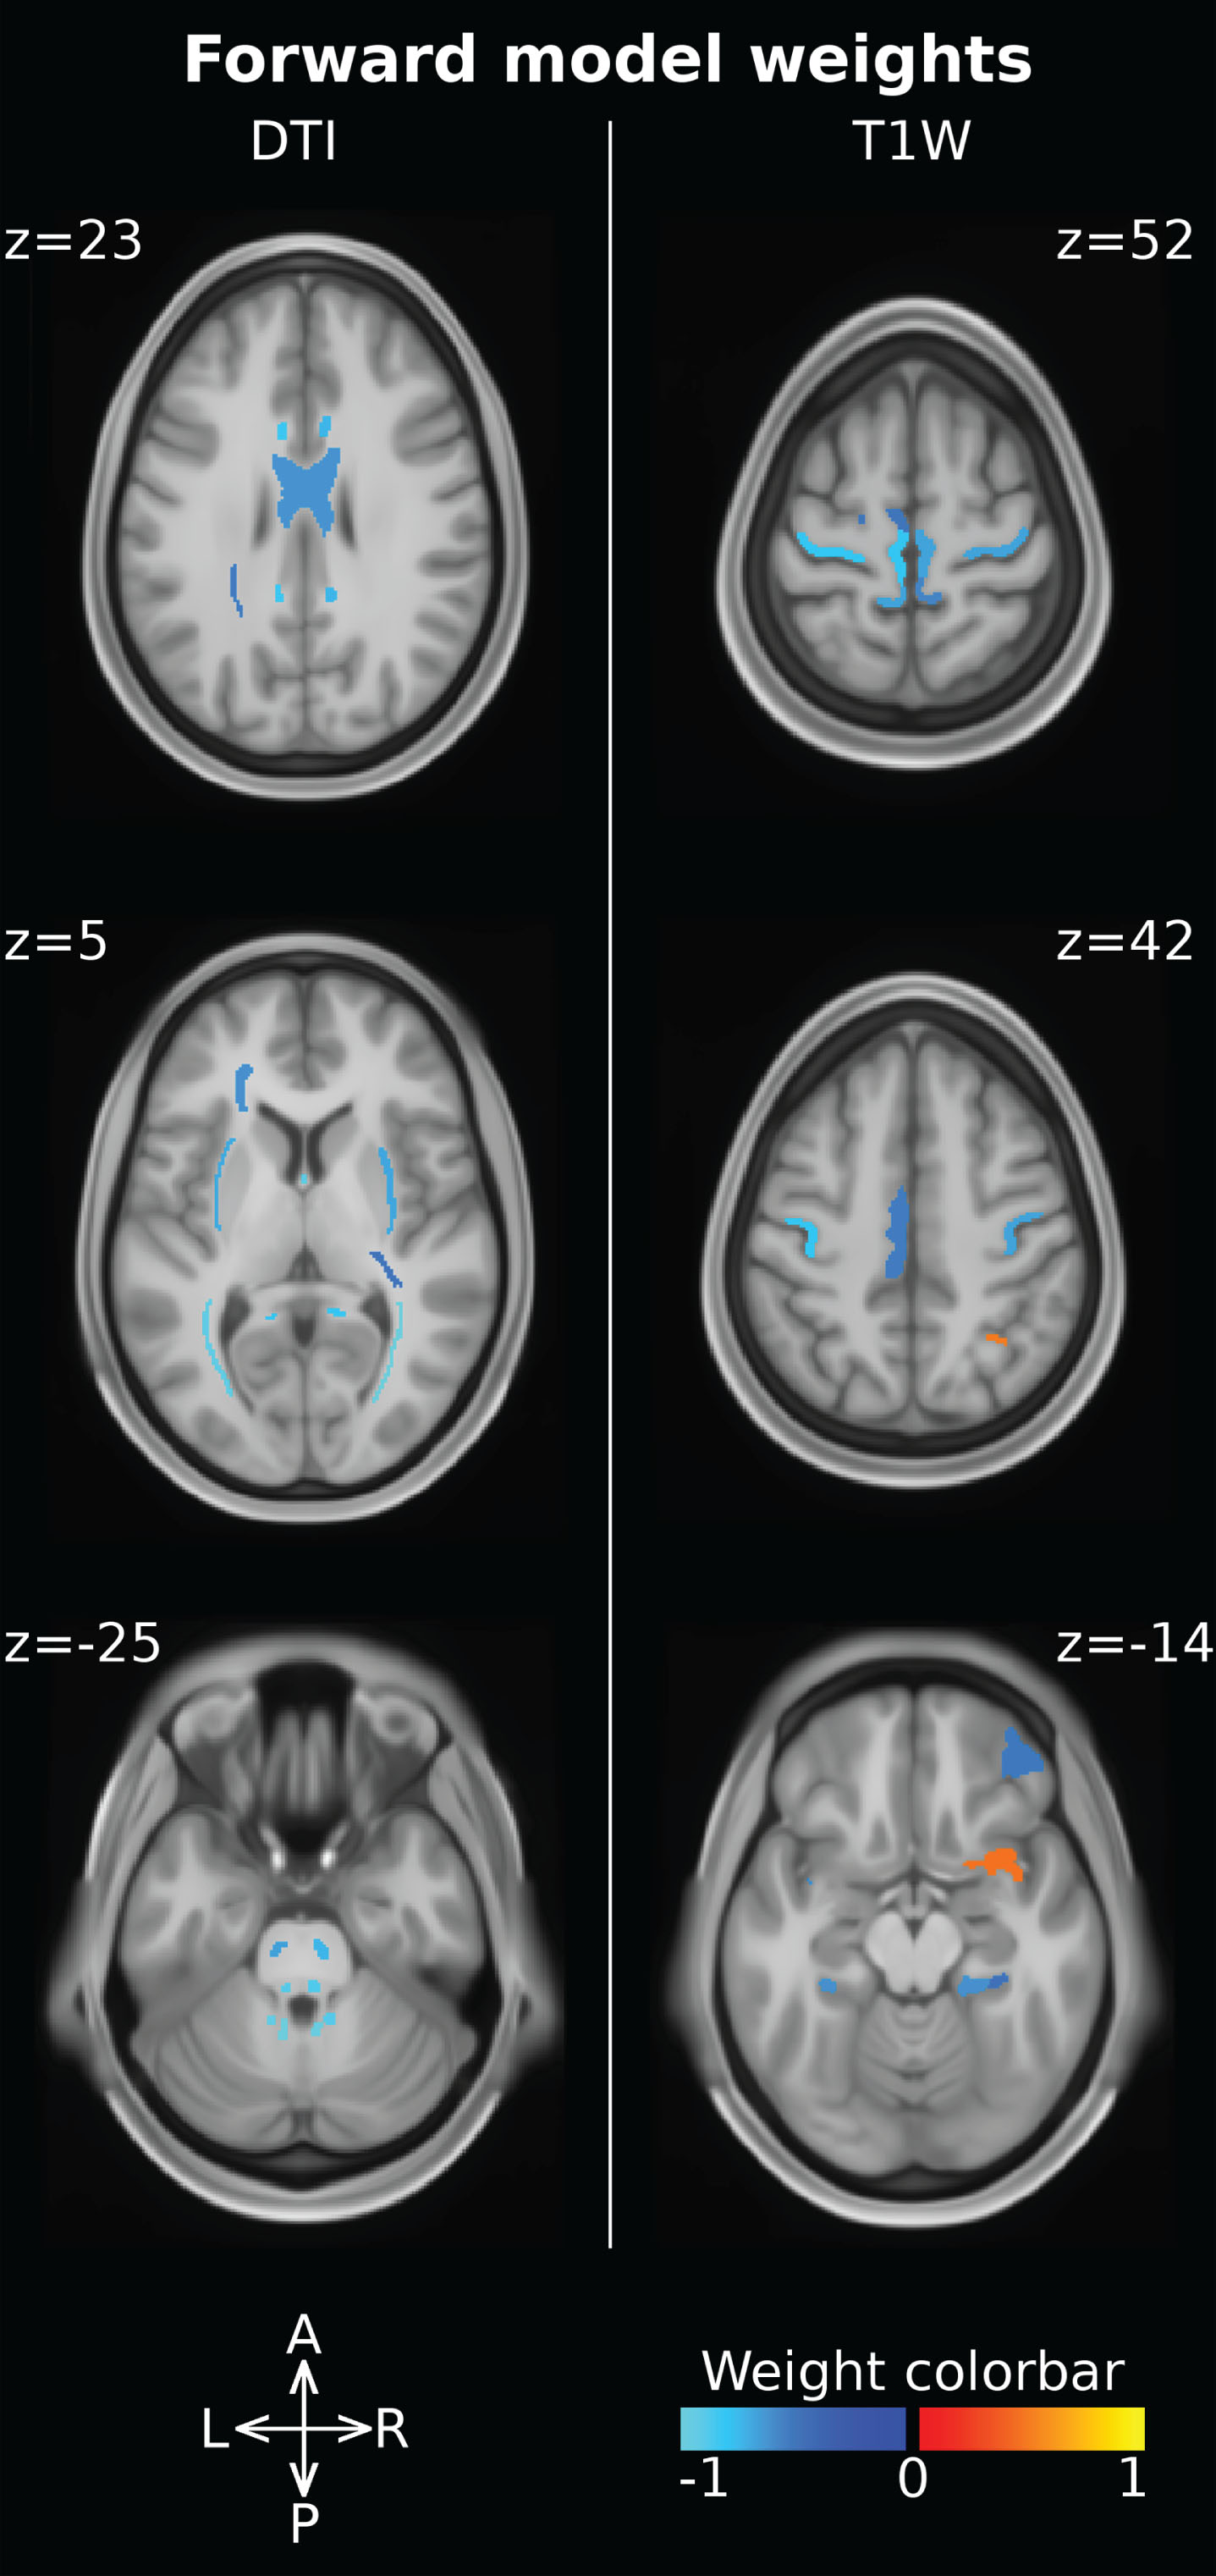 Forward model weights associated with the ROI measures. DTI-derived features (i.e. FA, MD) are reported on the left, while T1W-derived ones (i.e. cortical thickness, volume) are reported on the right. The ROI intensity and color-code are used to report the weight magnitude and sign, respectively.